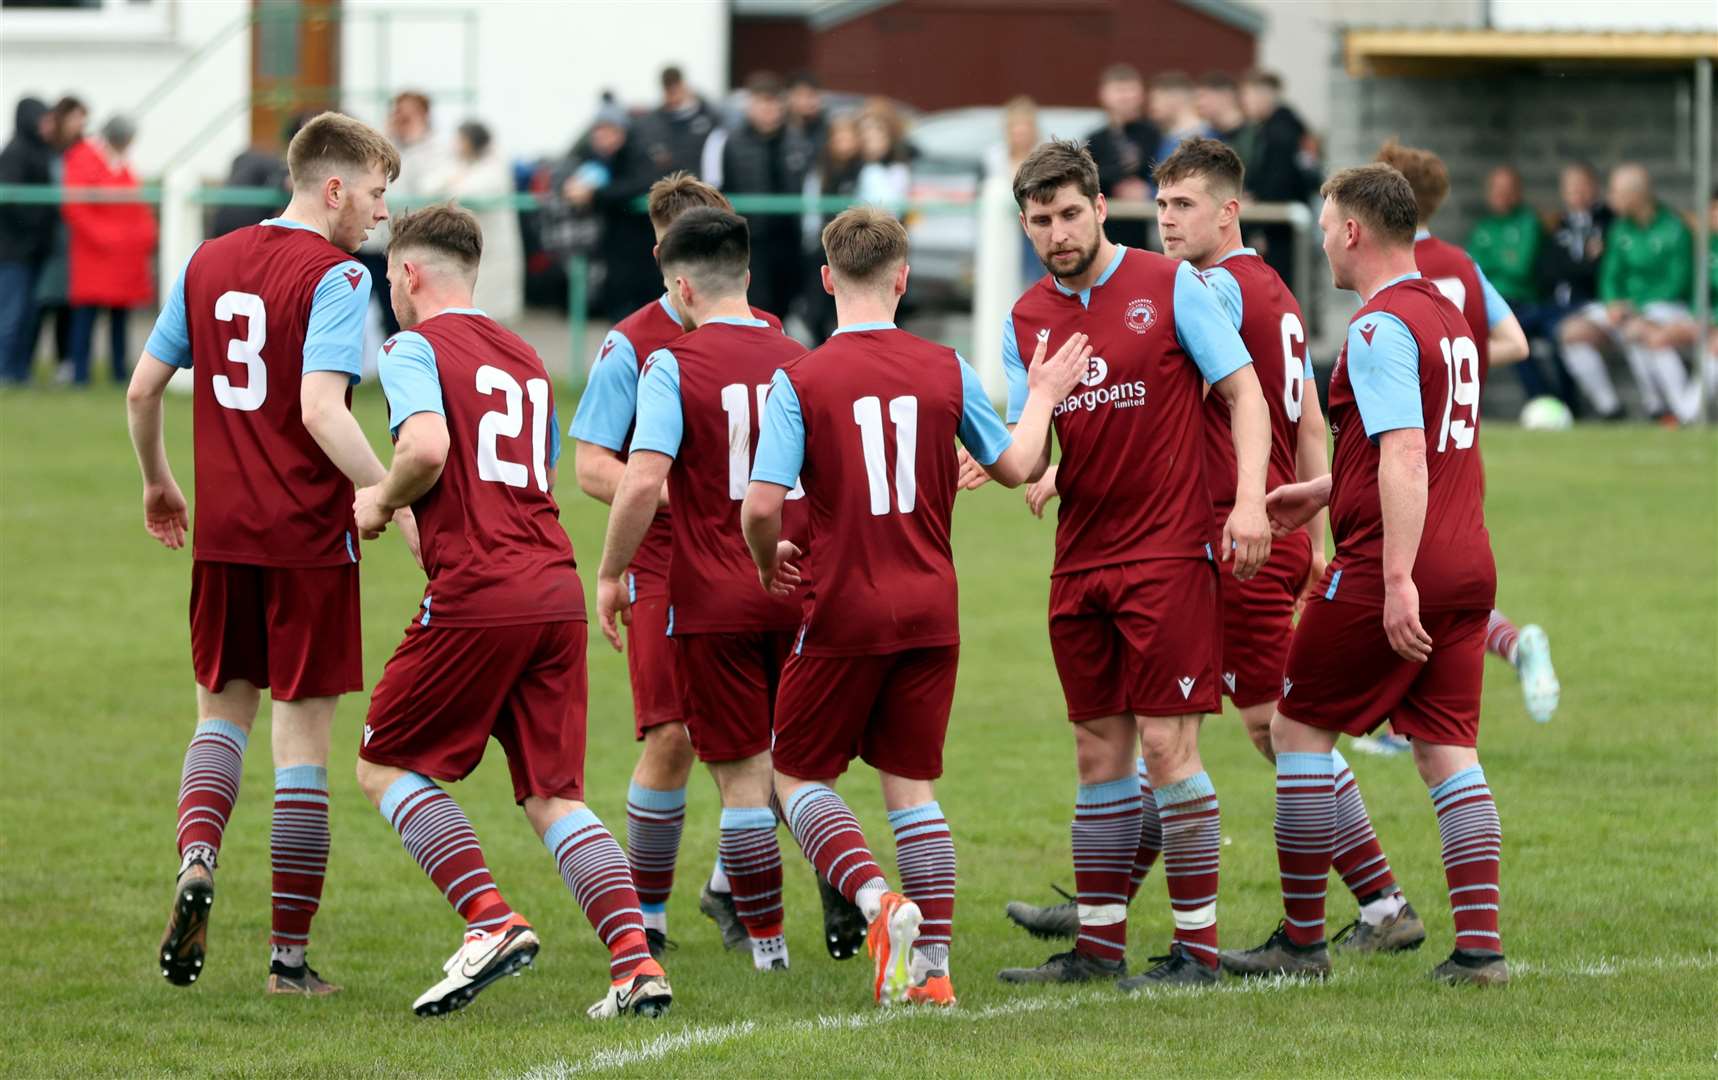 Team-mates congratulate Grant Steven after his goal for Pentland United. Picture: James Gunn